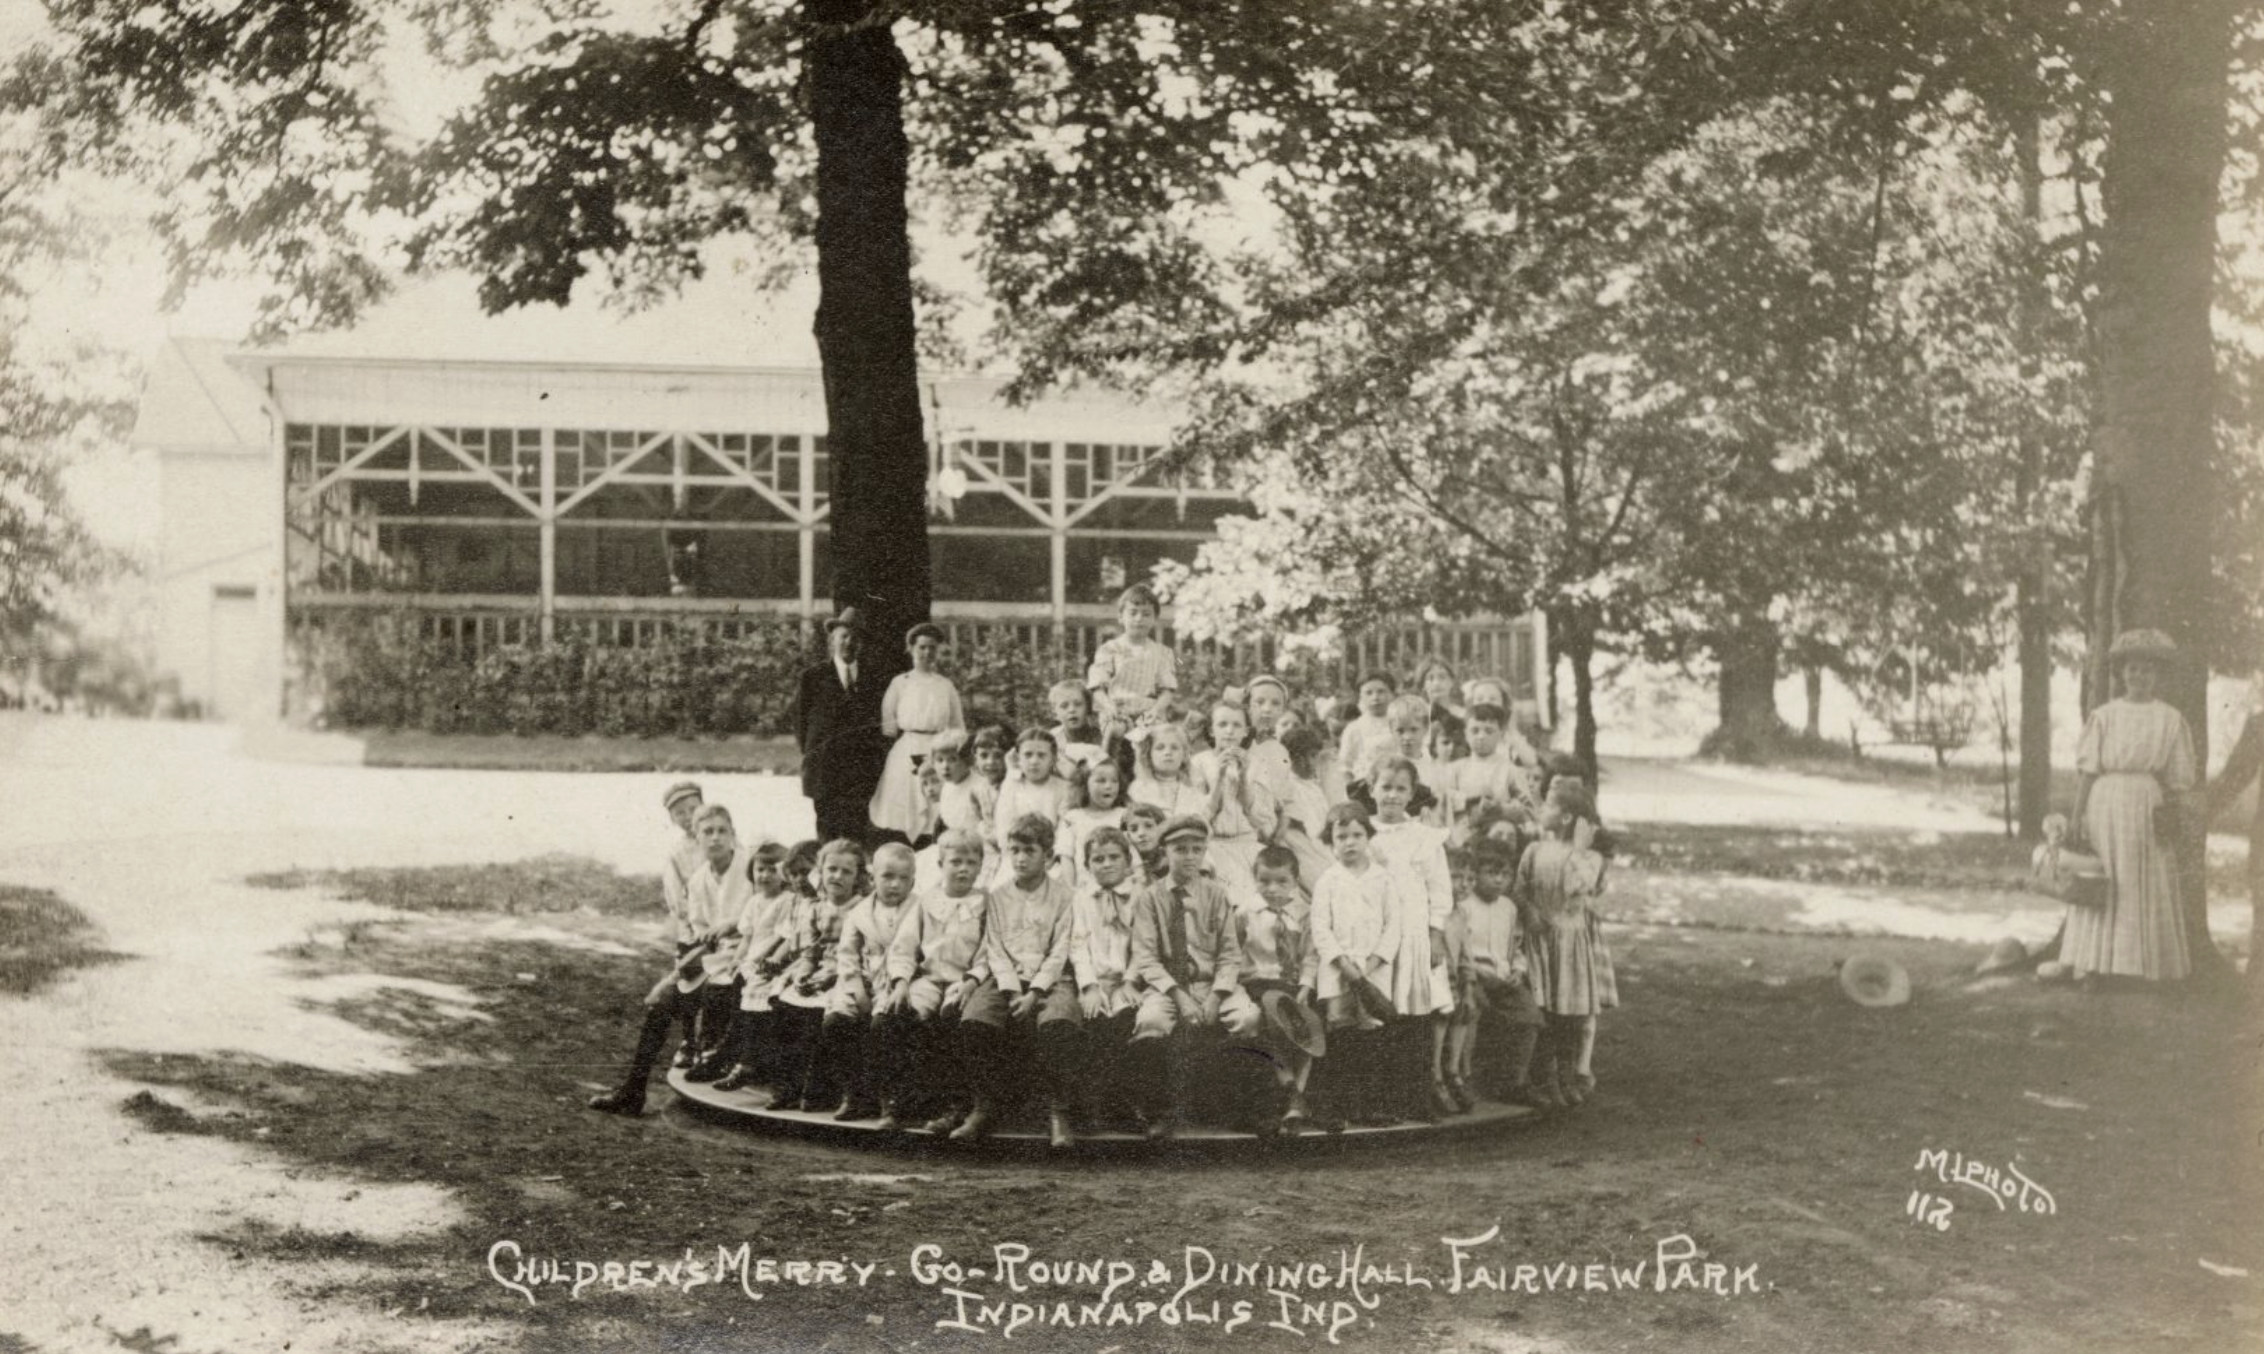 Children sit on the merry-go-round in Fairview Park while adults stand behind them and off to the side.  The park's dining hall stands in the background.